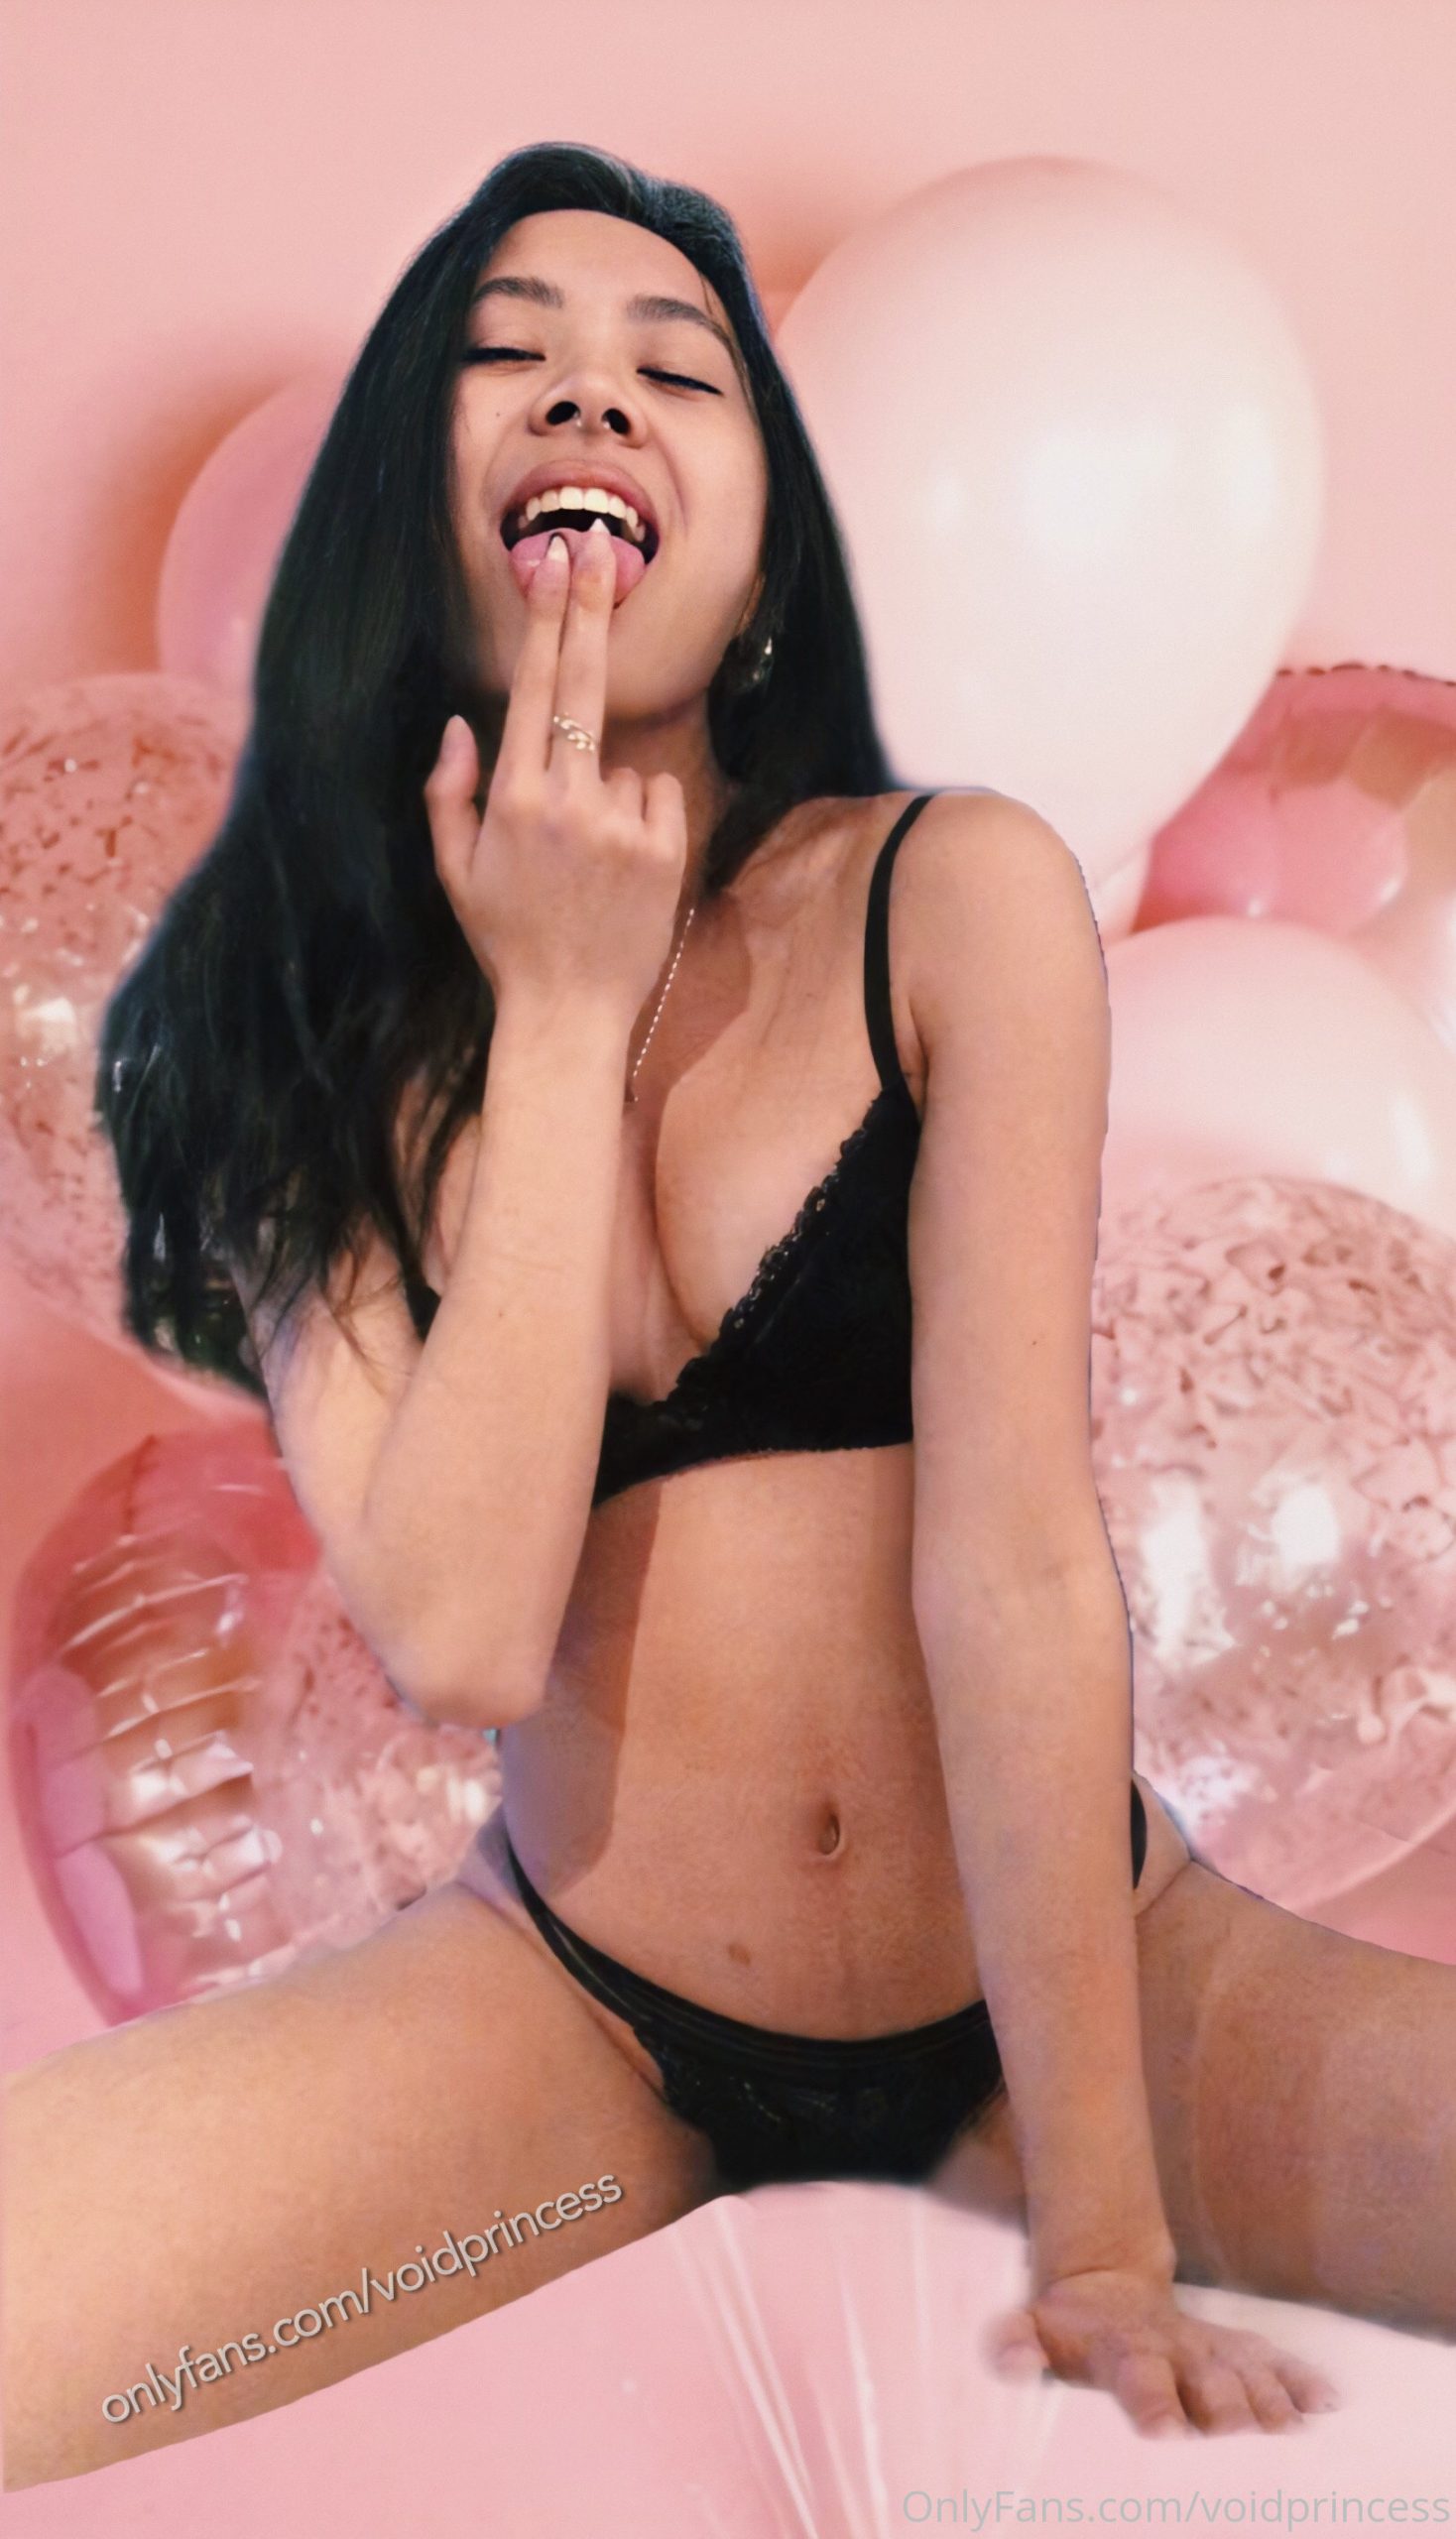 Voidprincess Leaked Onlyfans 0026